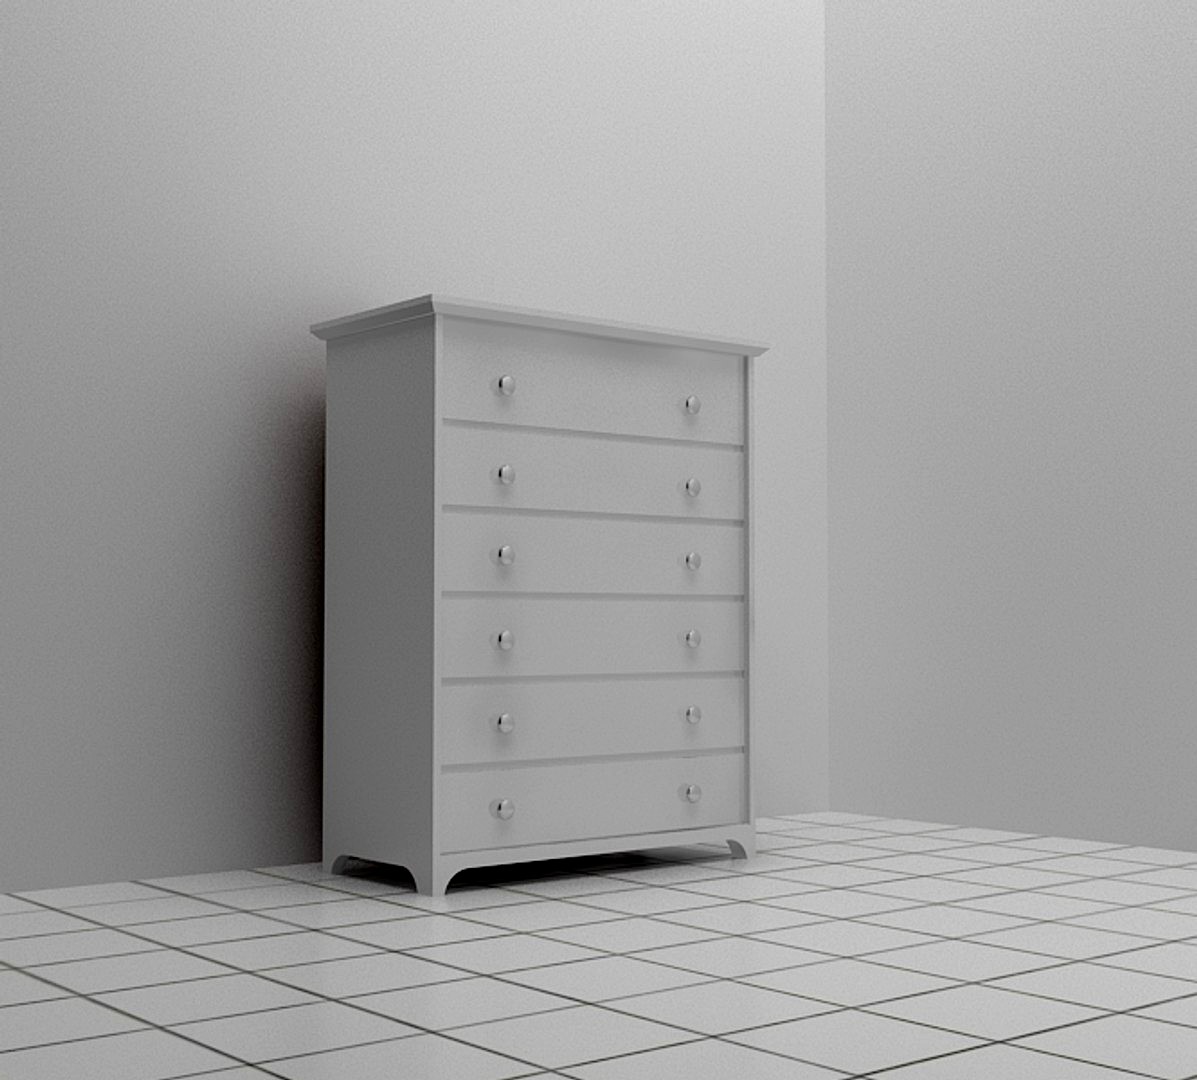 Low height cabinet design